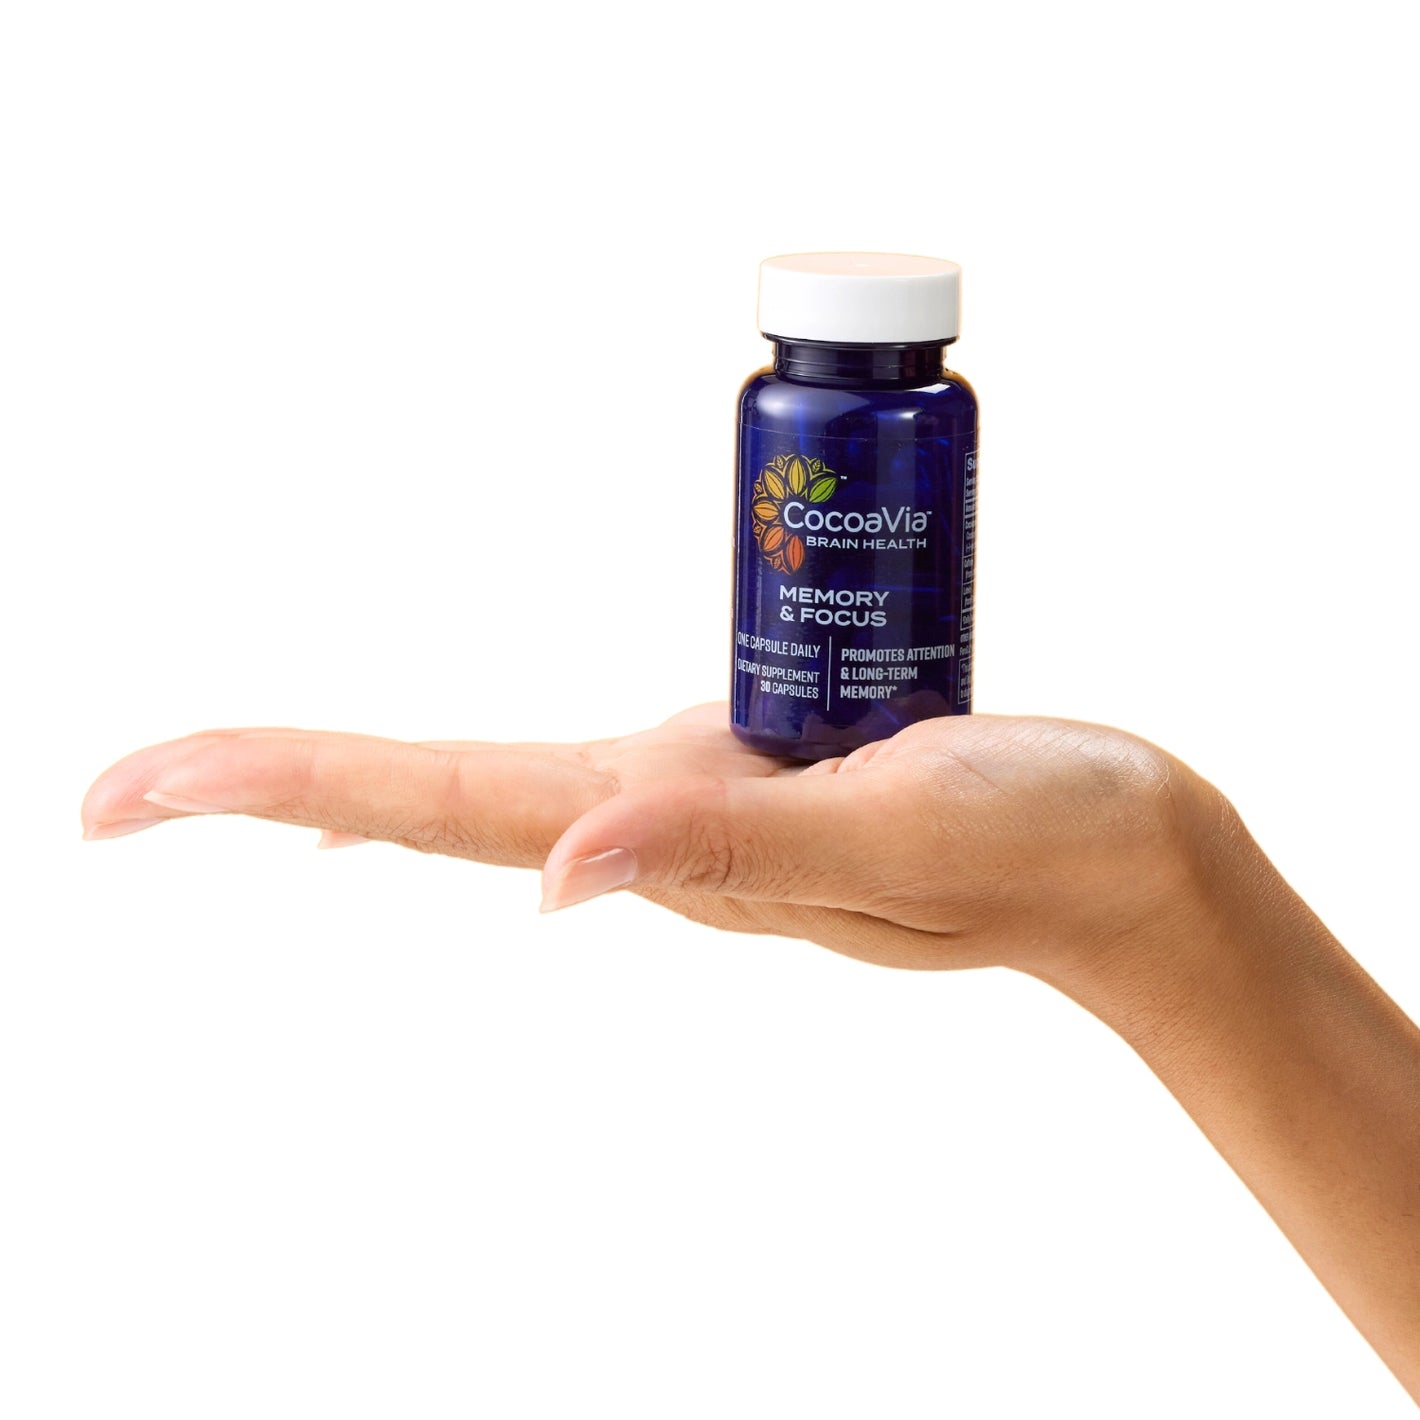 Hand holding CocoaVia Memory & Focus Bottle